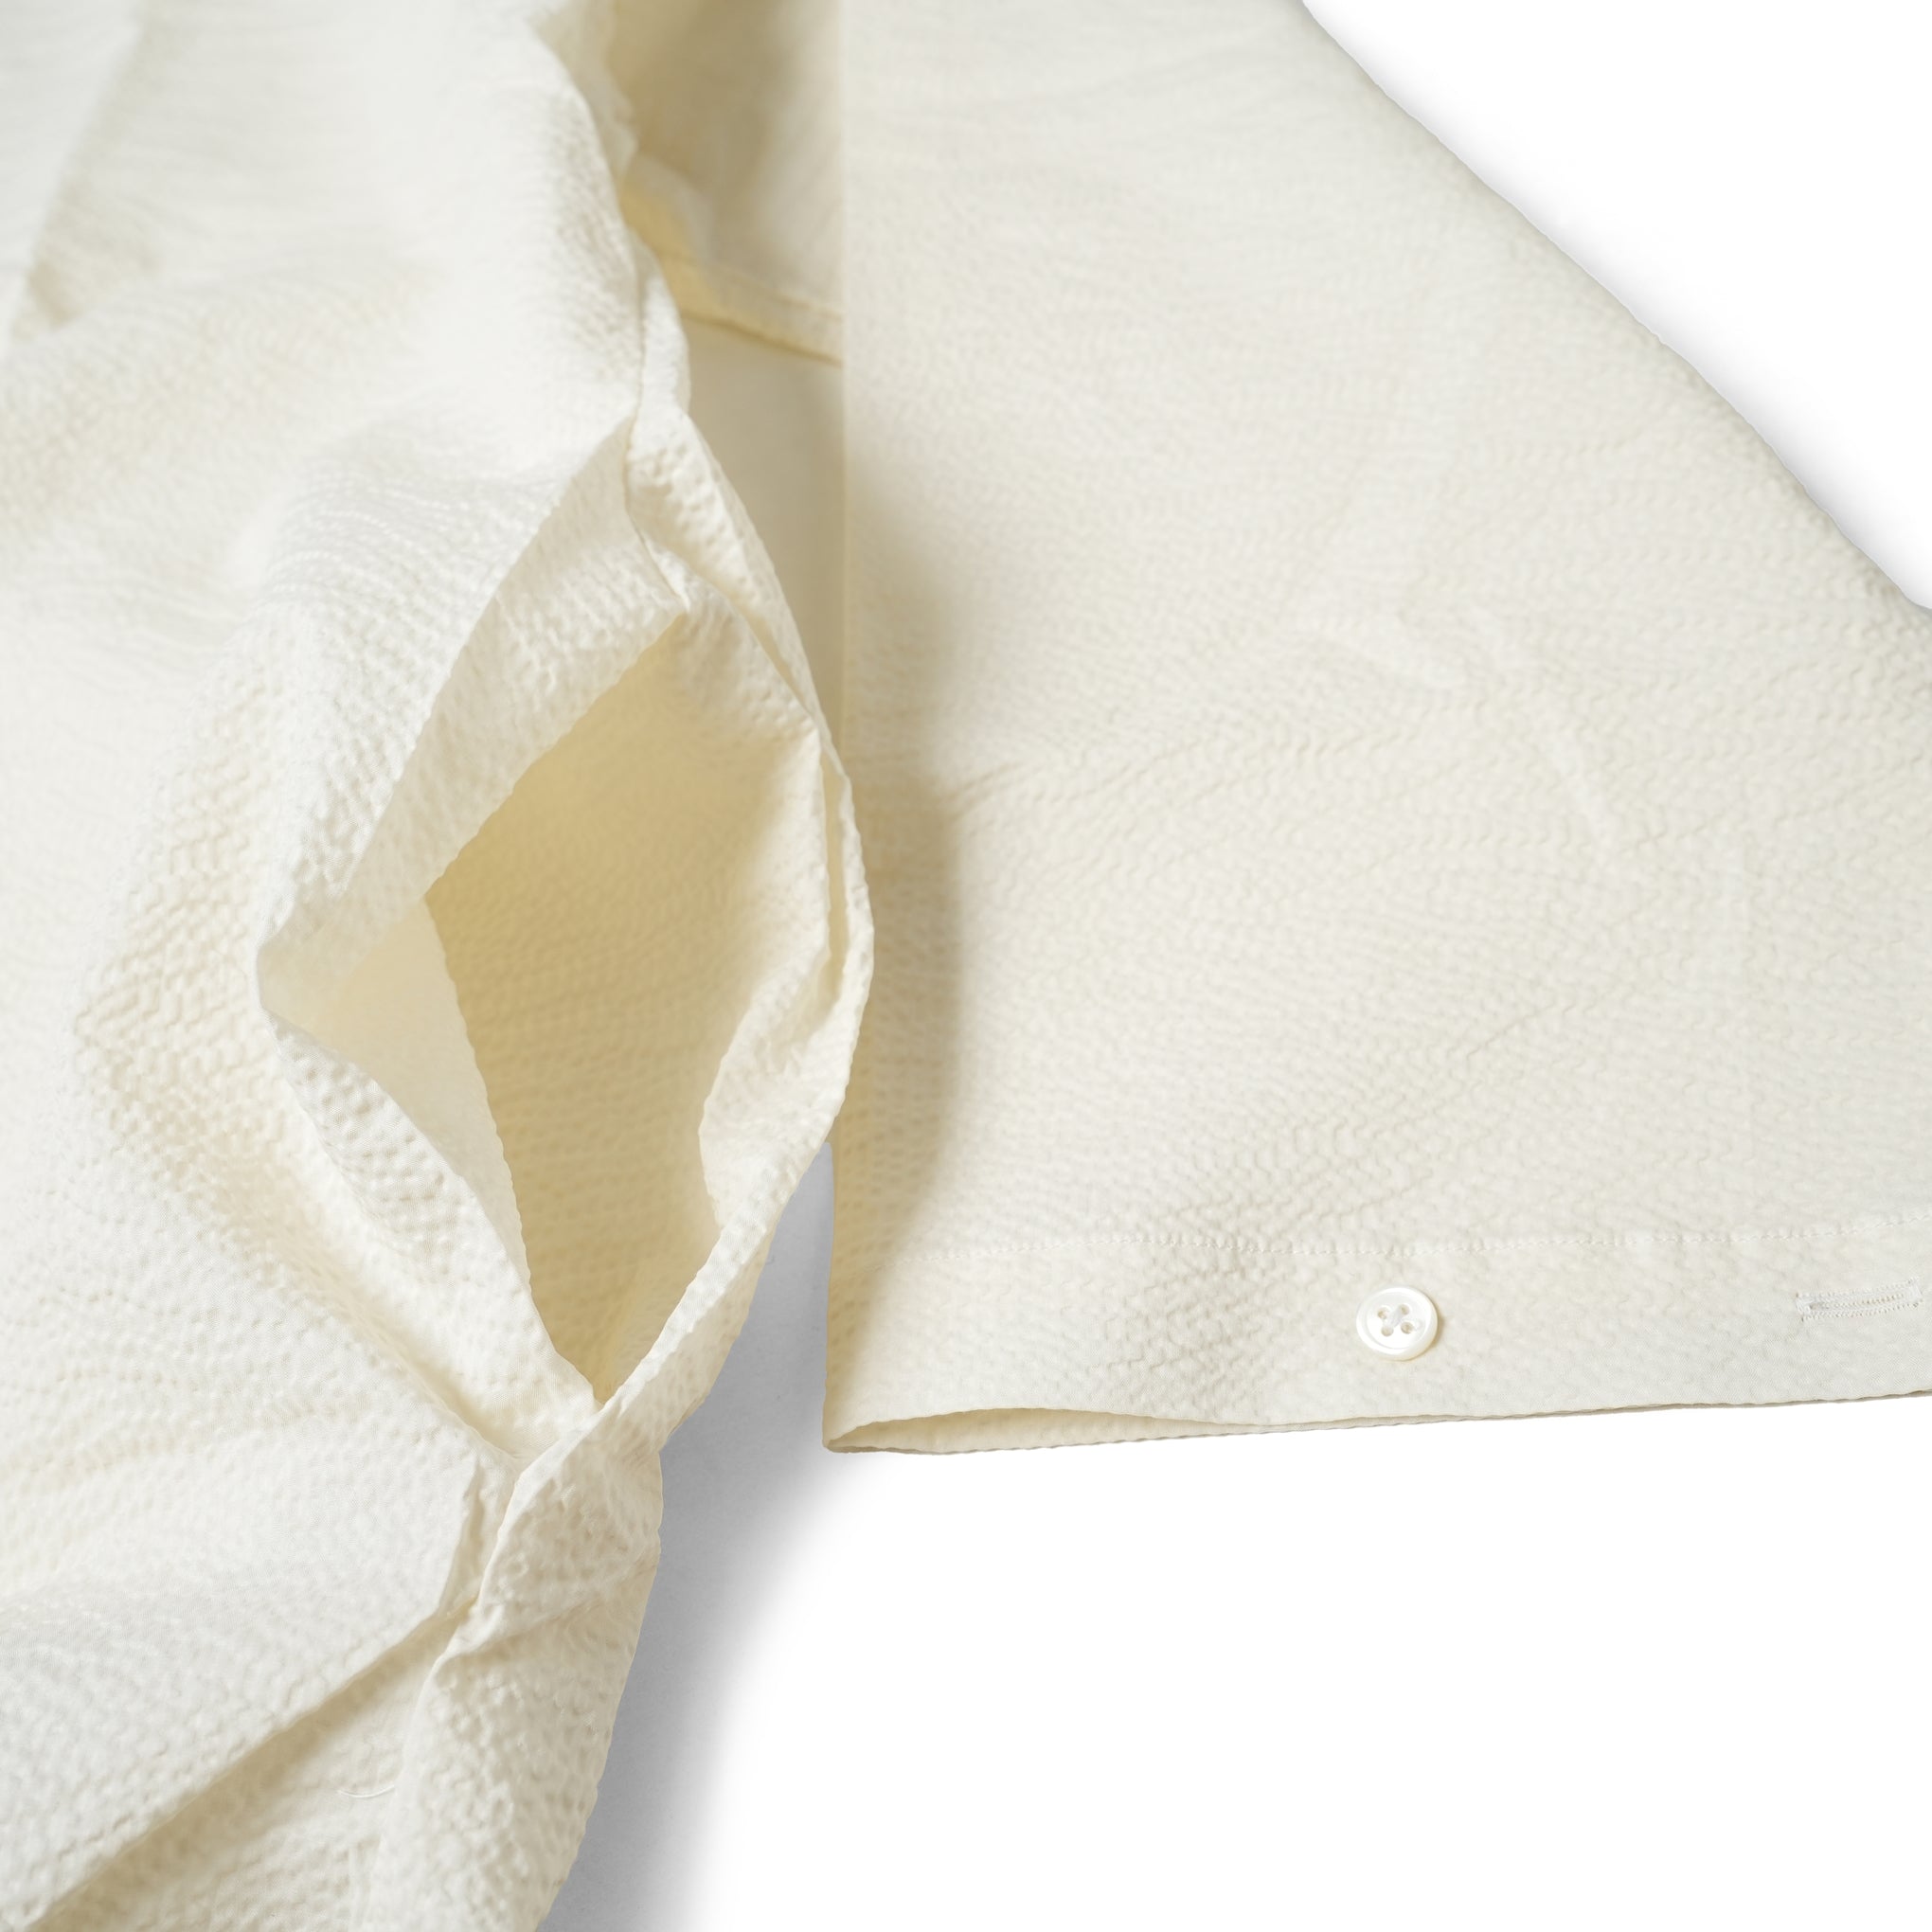 Name: MEX KAFTAN SHIRT | Color:Ivory Ripple | Size:One 【CITYLIGHTS PRODUCTS_シティライツプロダクツ】